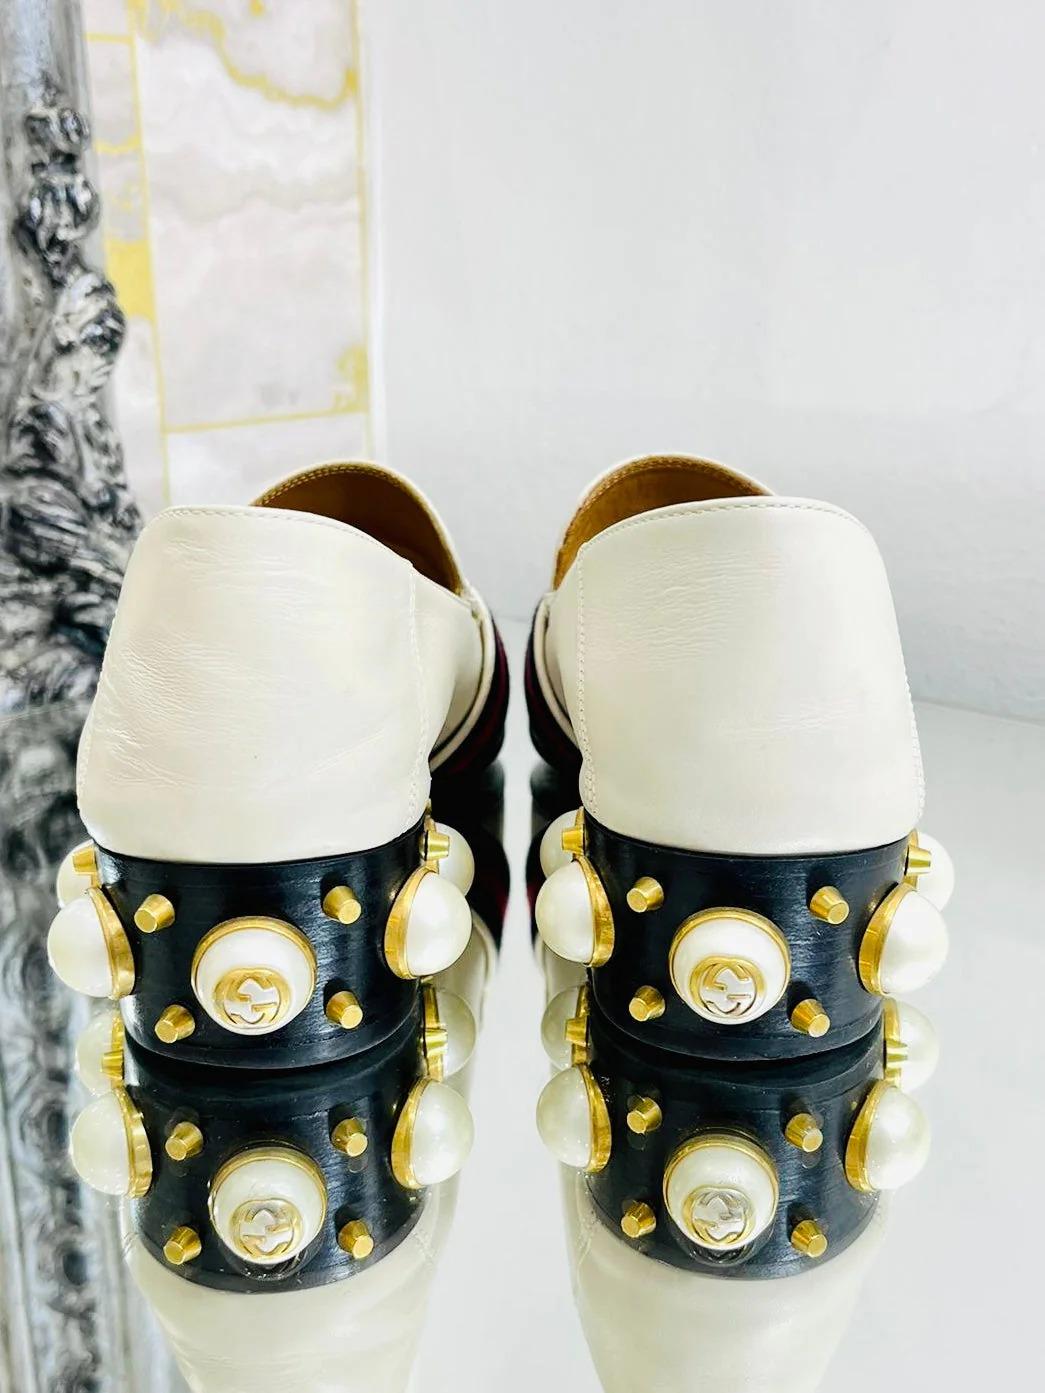 Women's Gucci Leather & Pearl Loafer